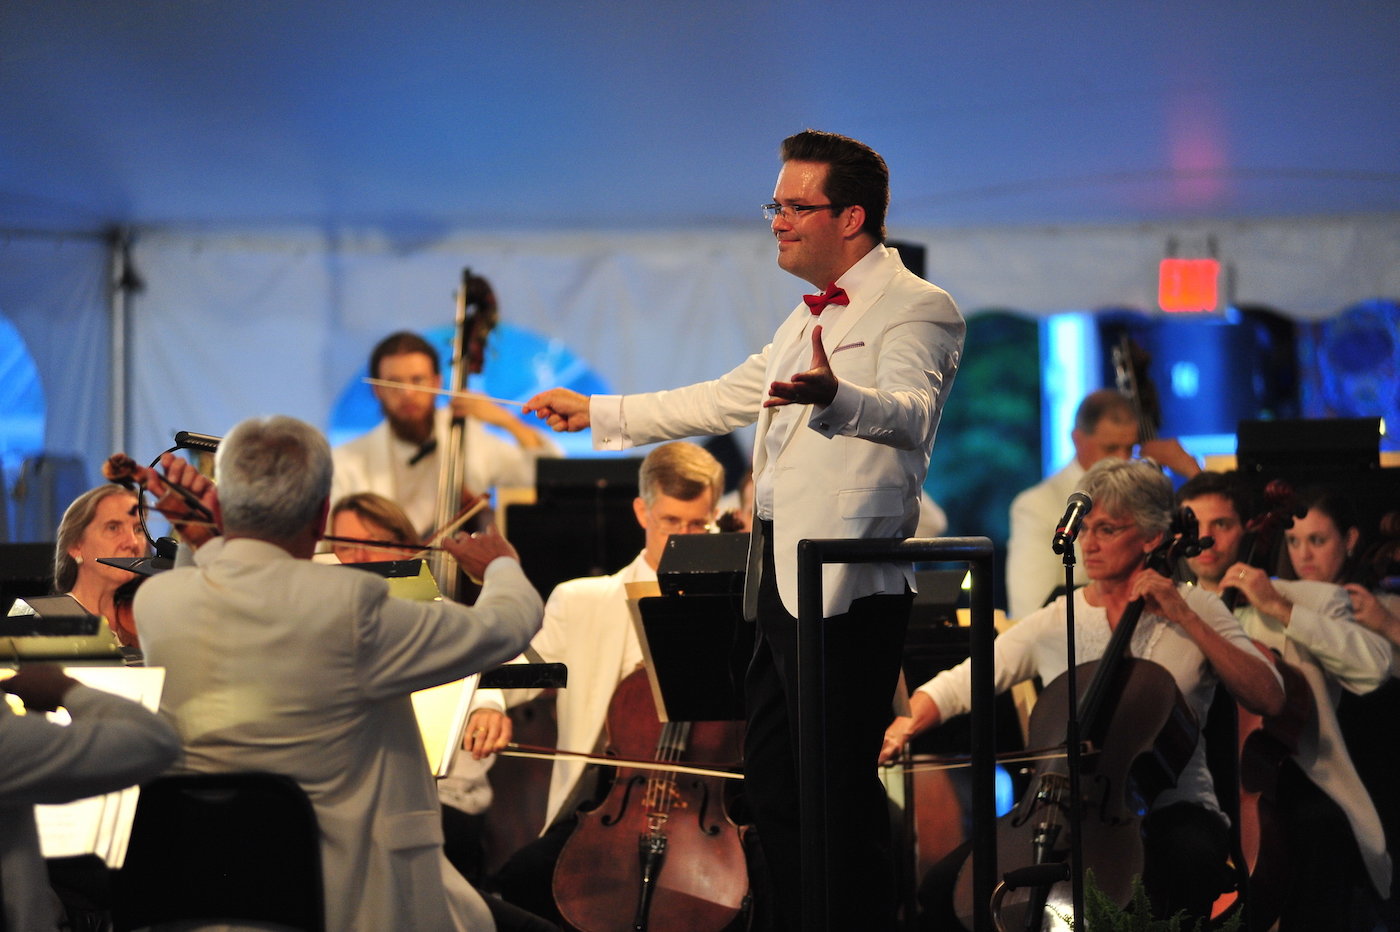 “An Evening with the Symphony,” featuring the Rochester Philharmonic Orchestra will take place on July 29 in Arrowhead Park.